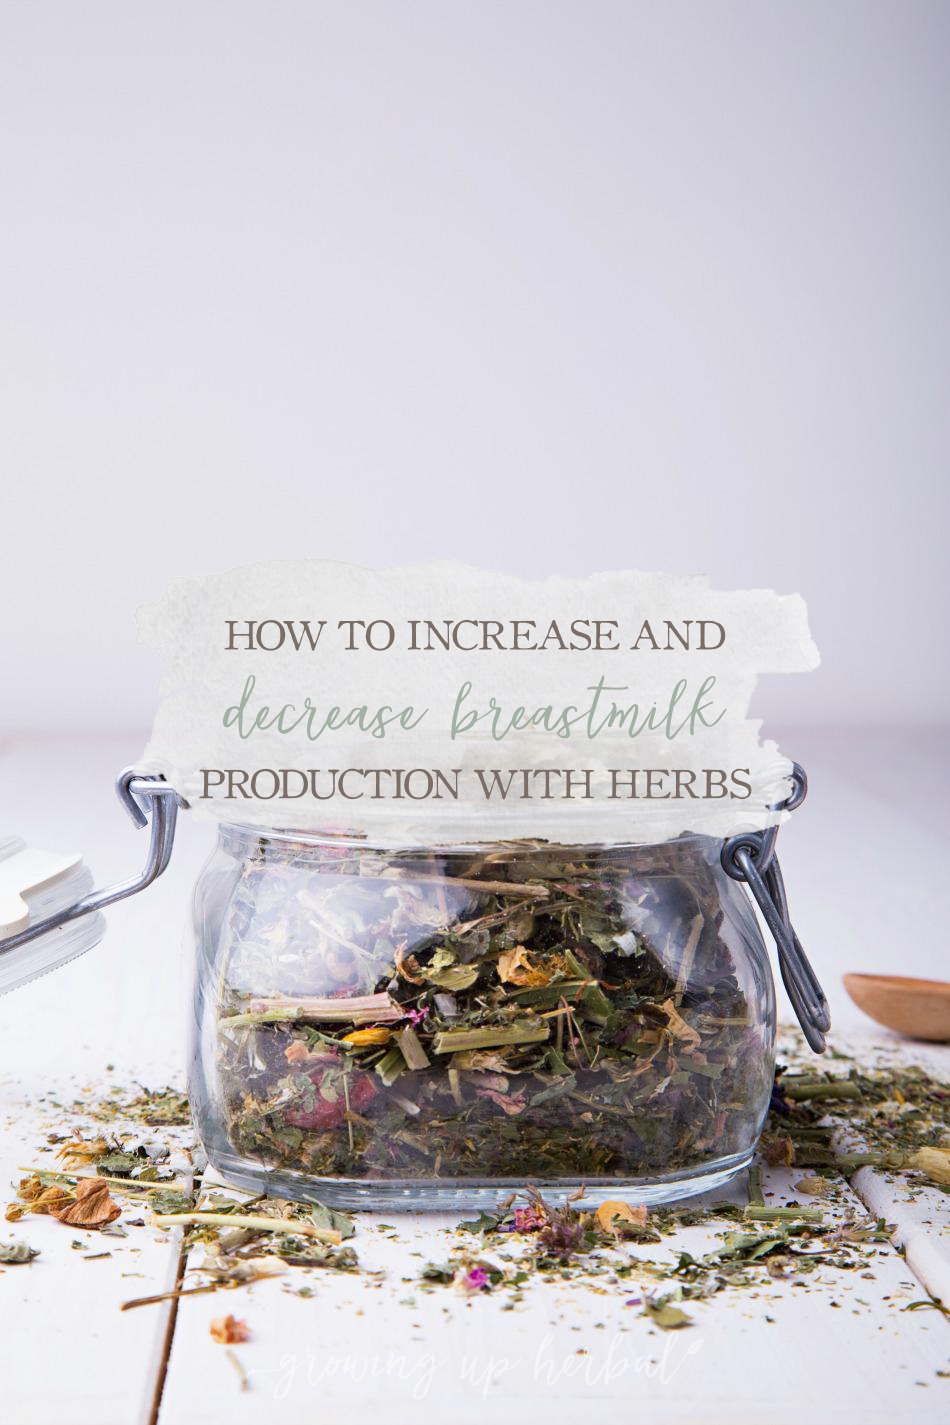 How To Increase and Decrease Breastmilk Production With Herbs | Growing Up Herbal | Need to increase or decrease your breastmilk supply? Here are herbs to help.